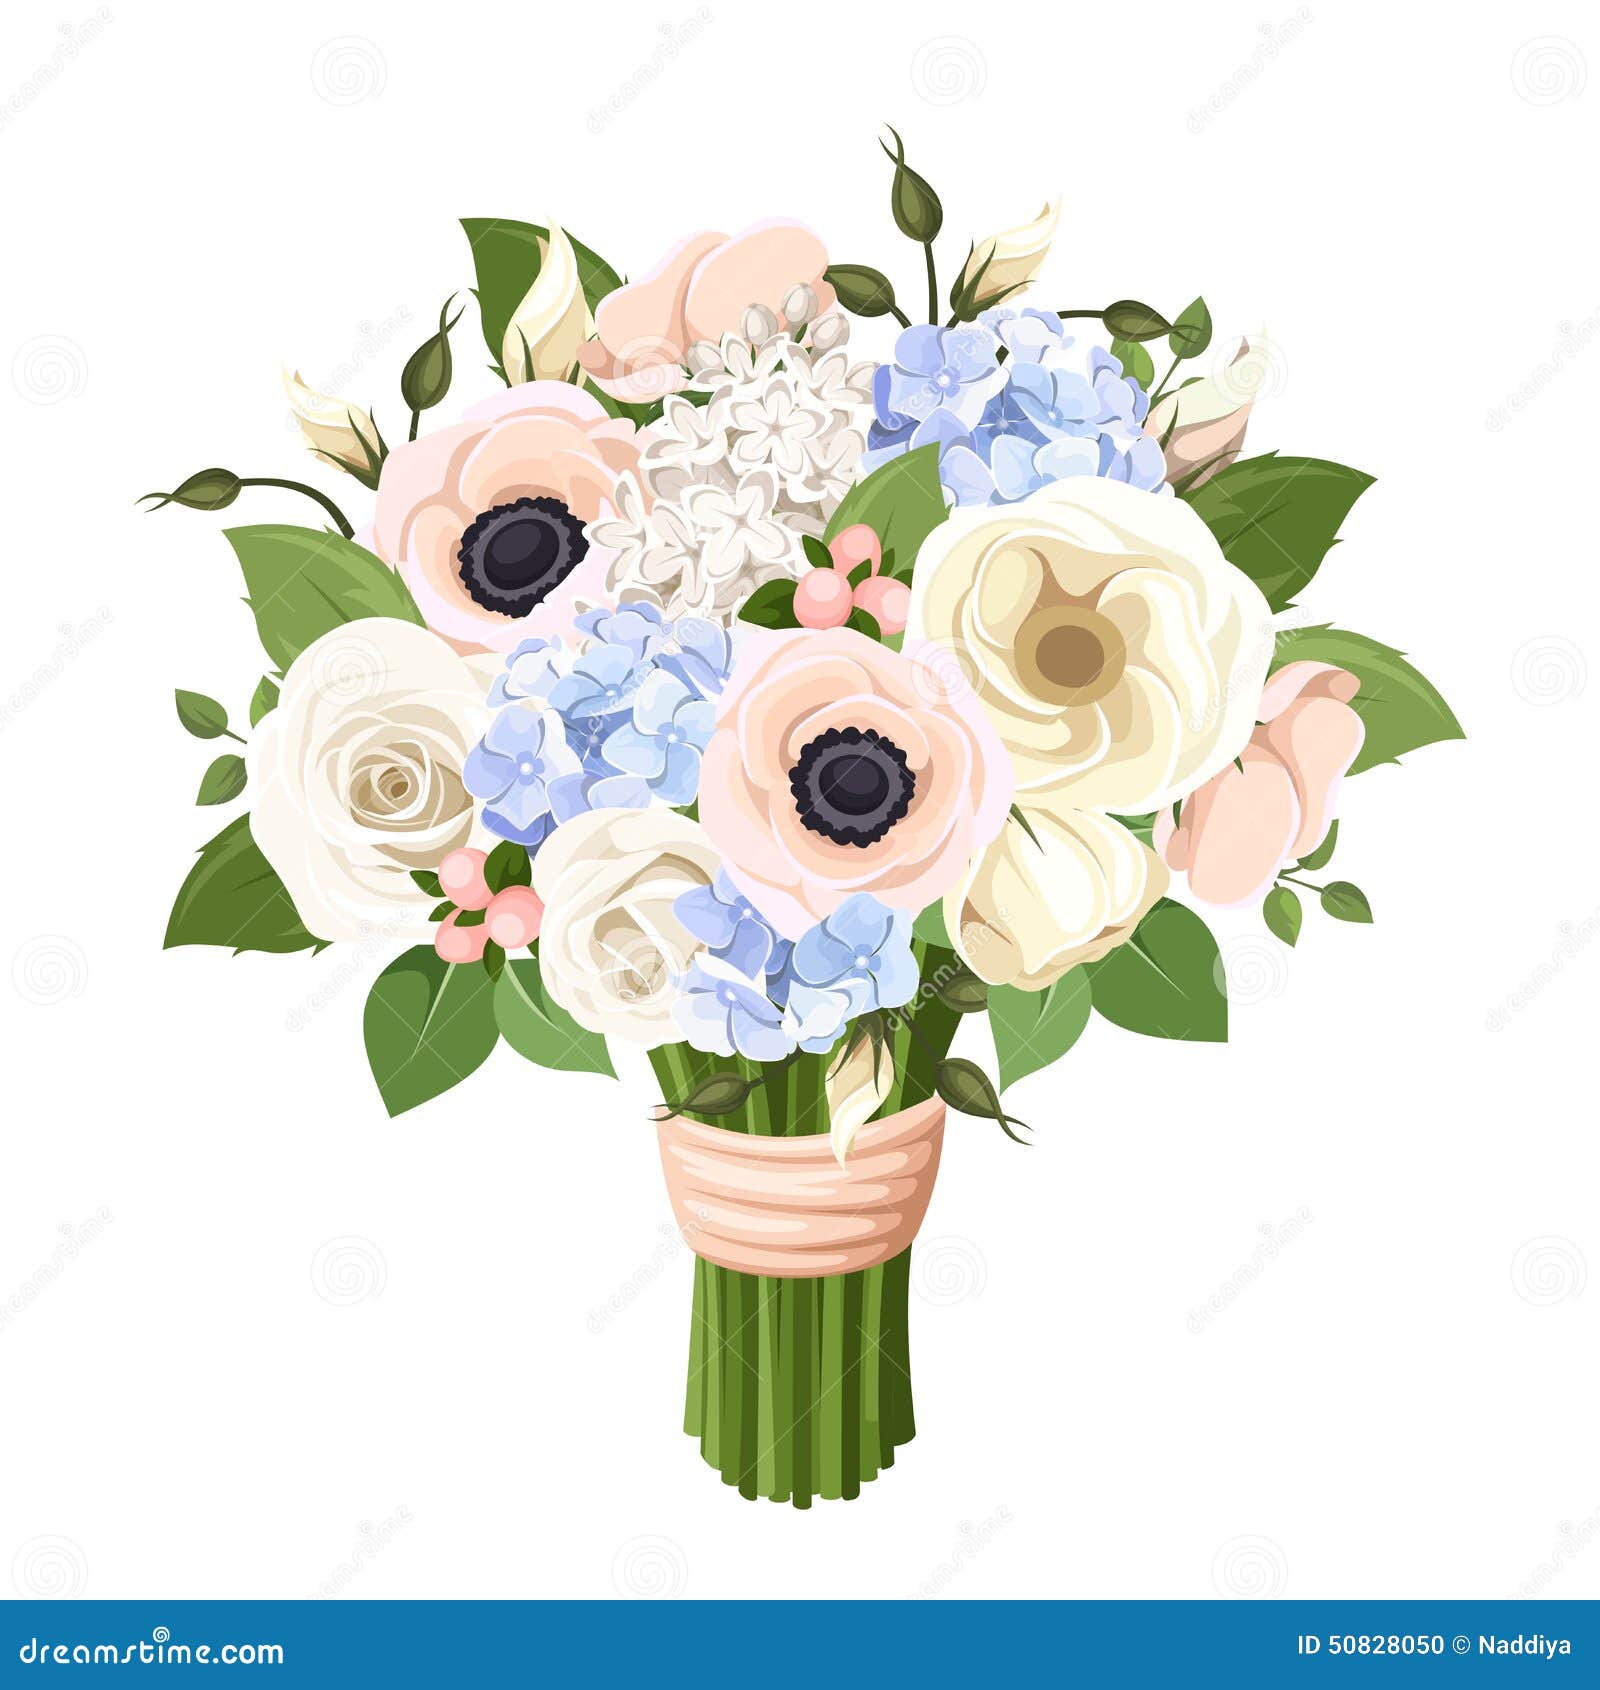 bouquet of roses, lisianthus, anemones and hydrangea flowers.  .